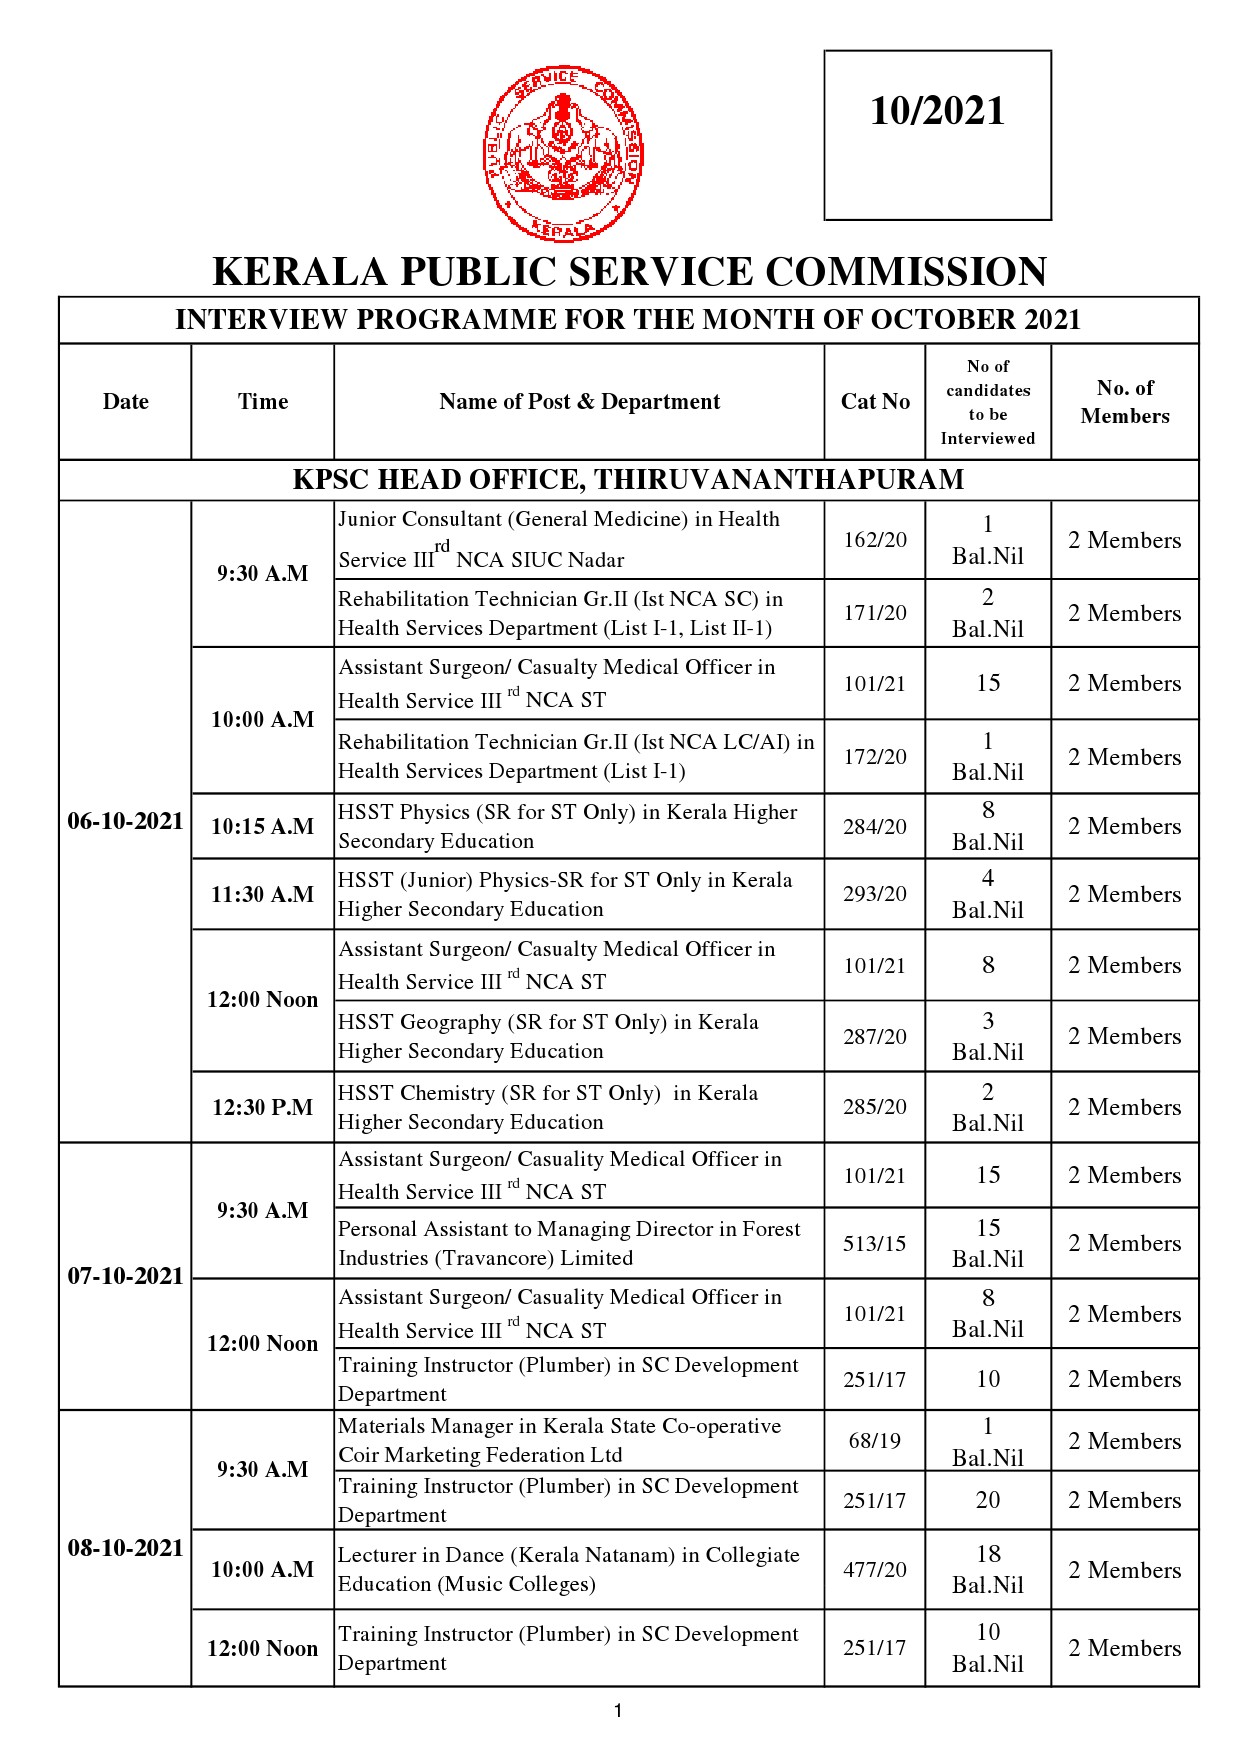 KPSC Interview Programme For The Month Of October 2021 - Notification Image 1